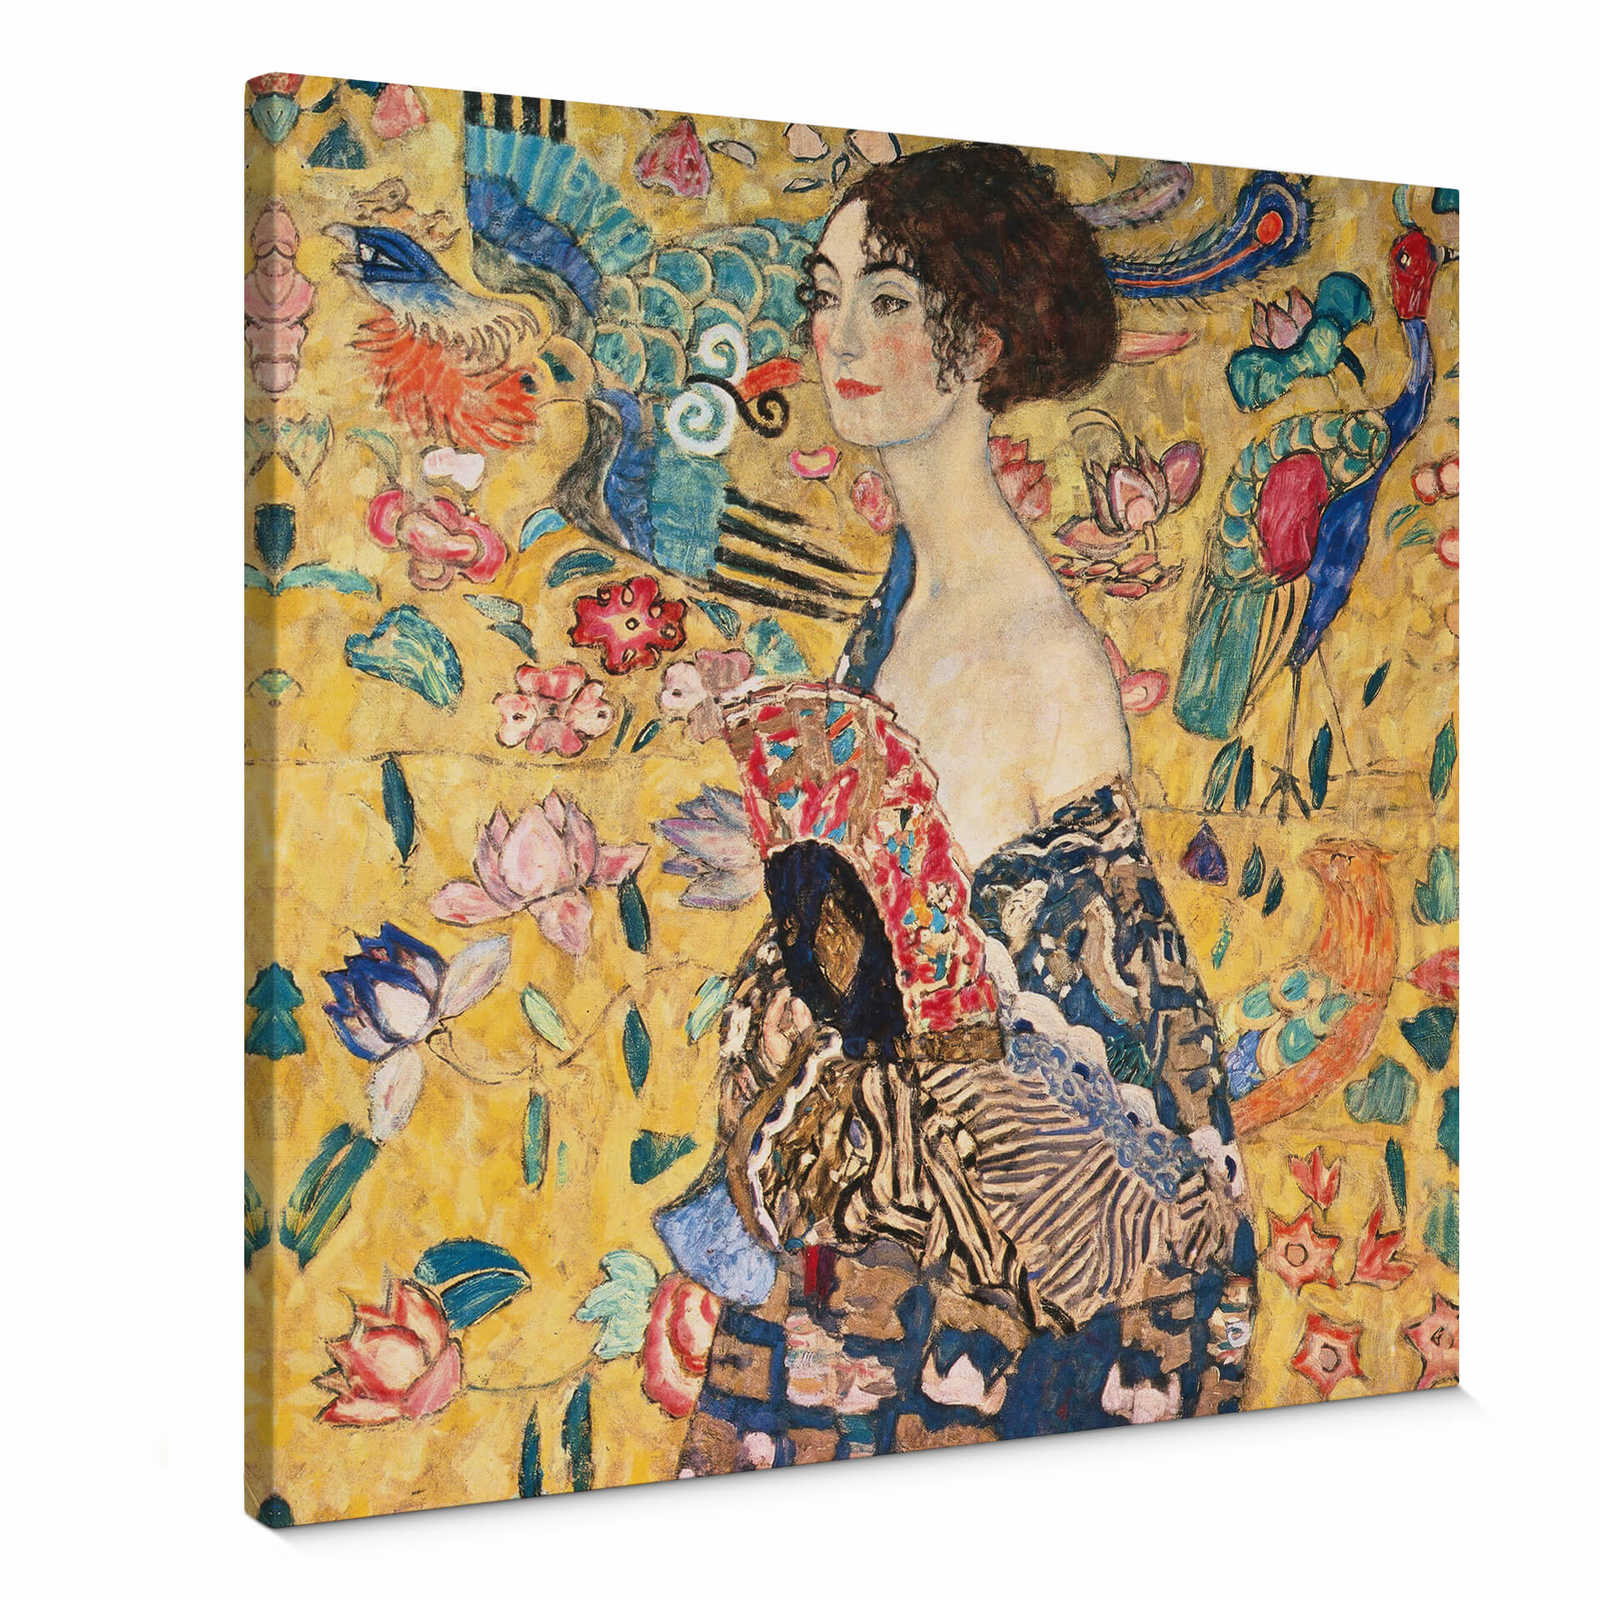         Square canvas print "Lady with fan" by Gustav Klimt
    